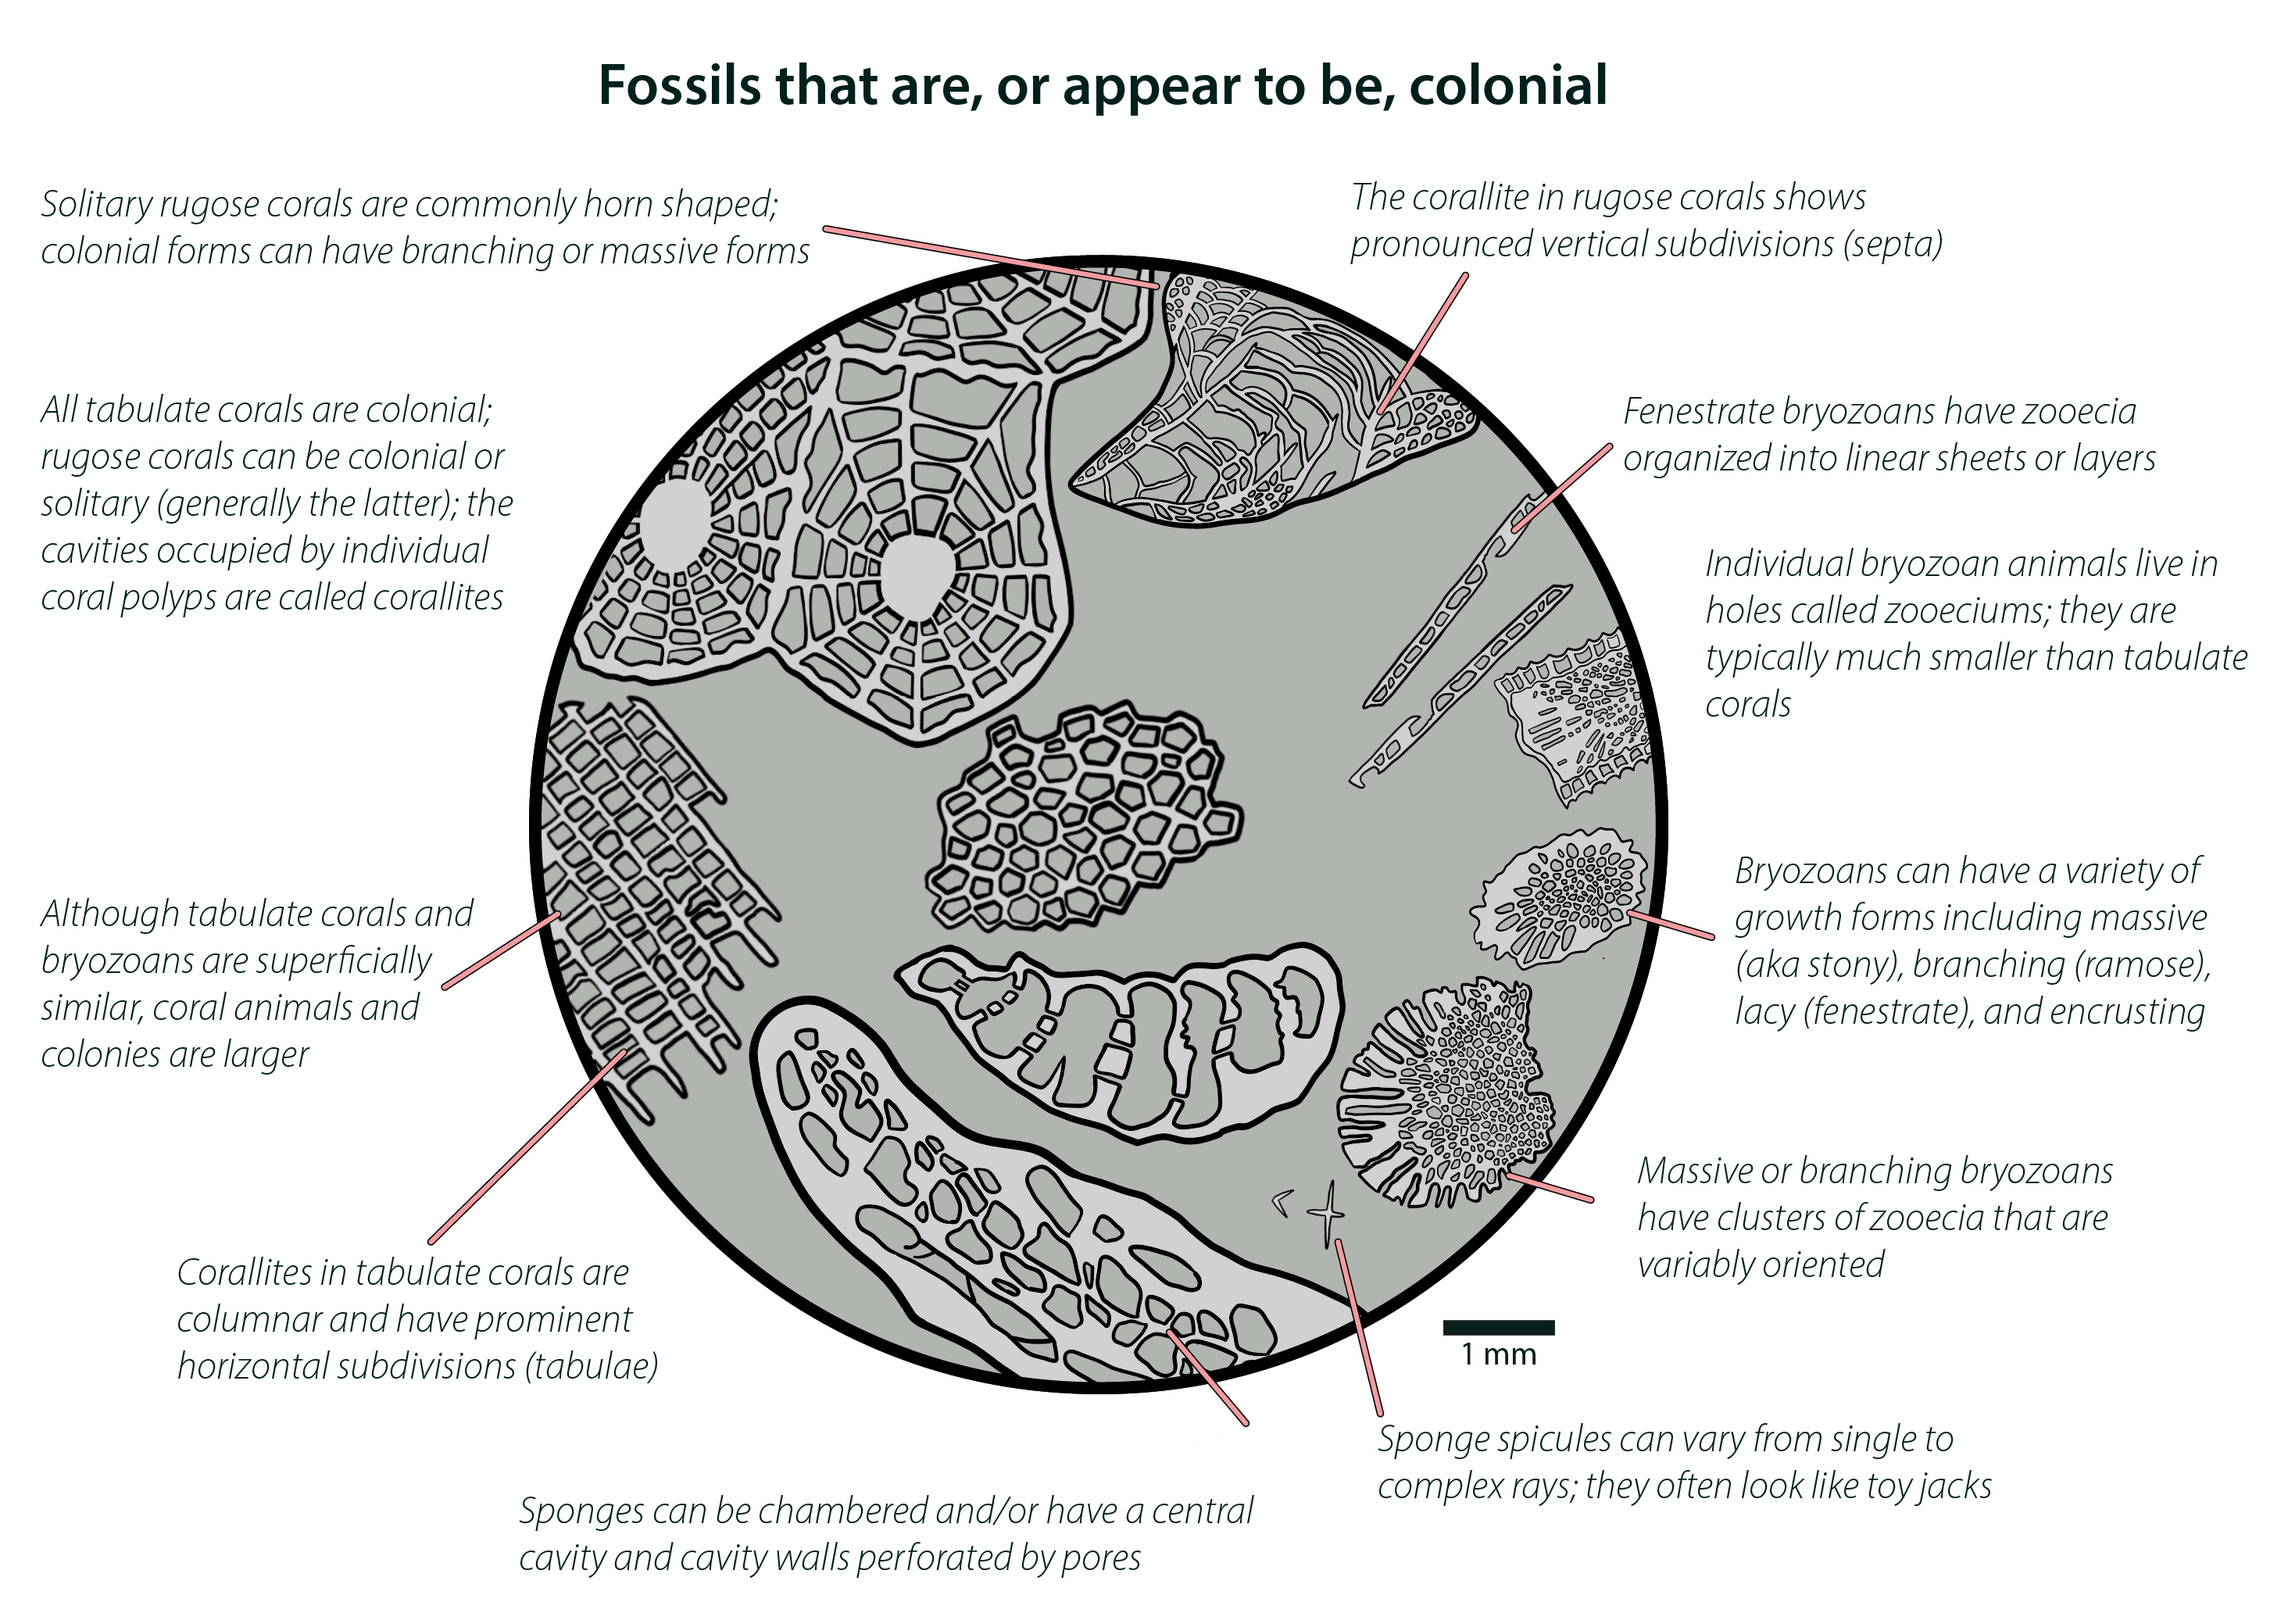 Colonial Fossils.jpg